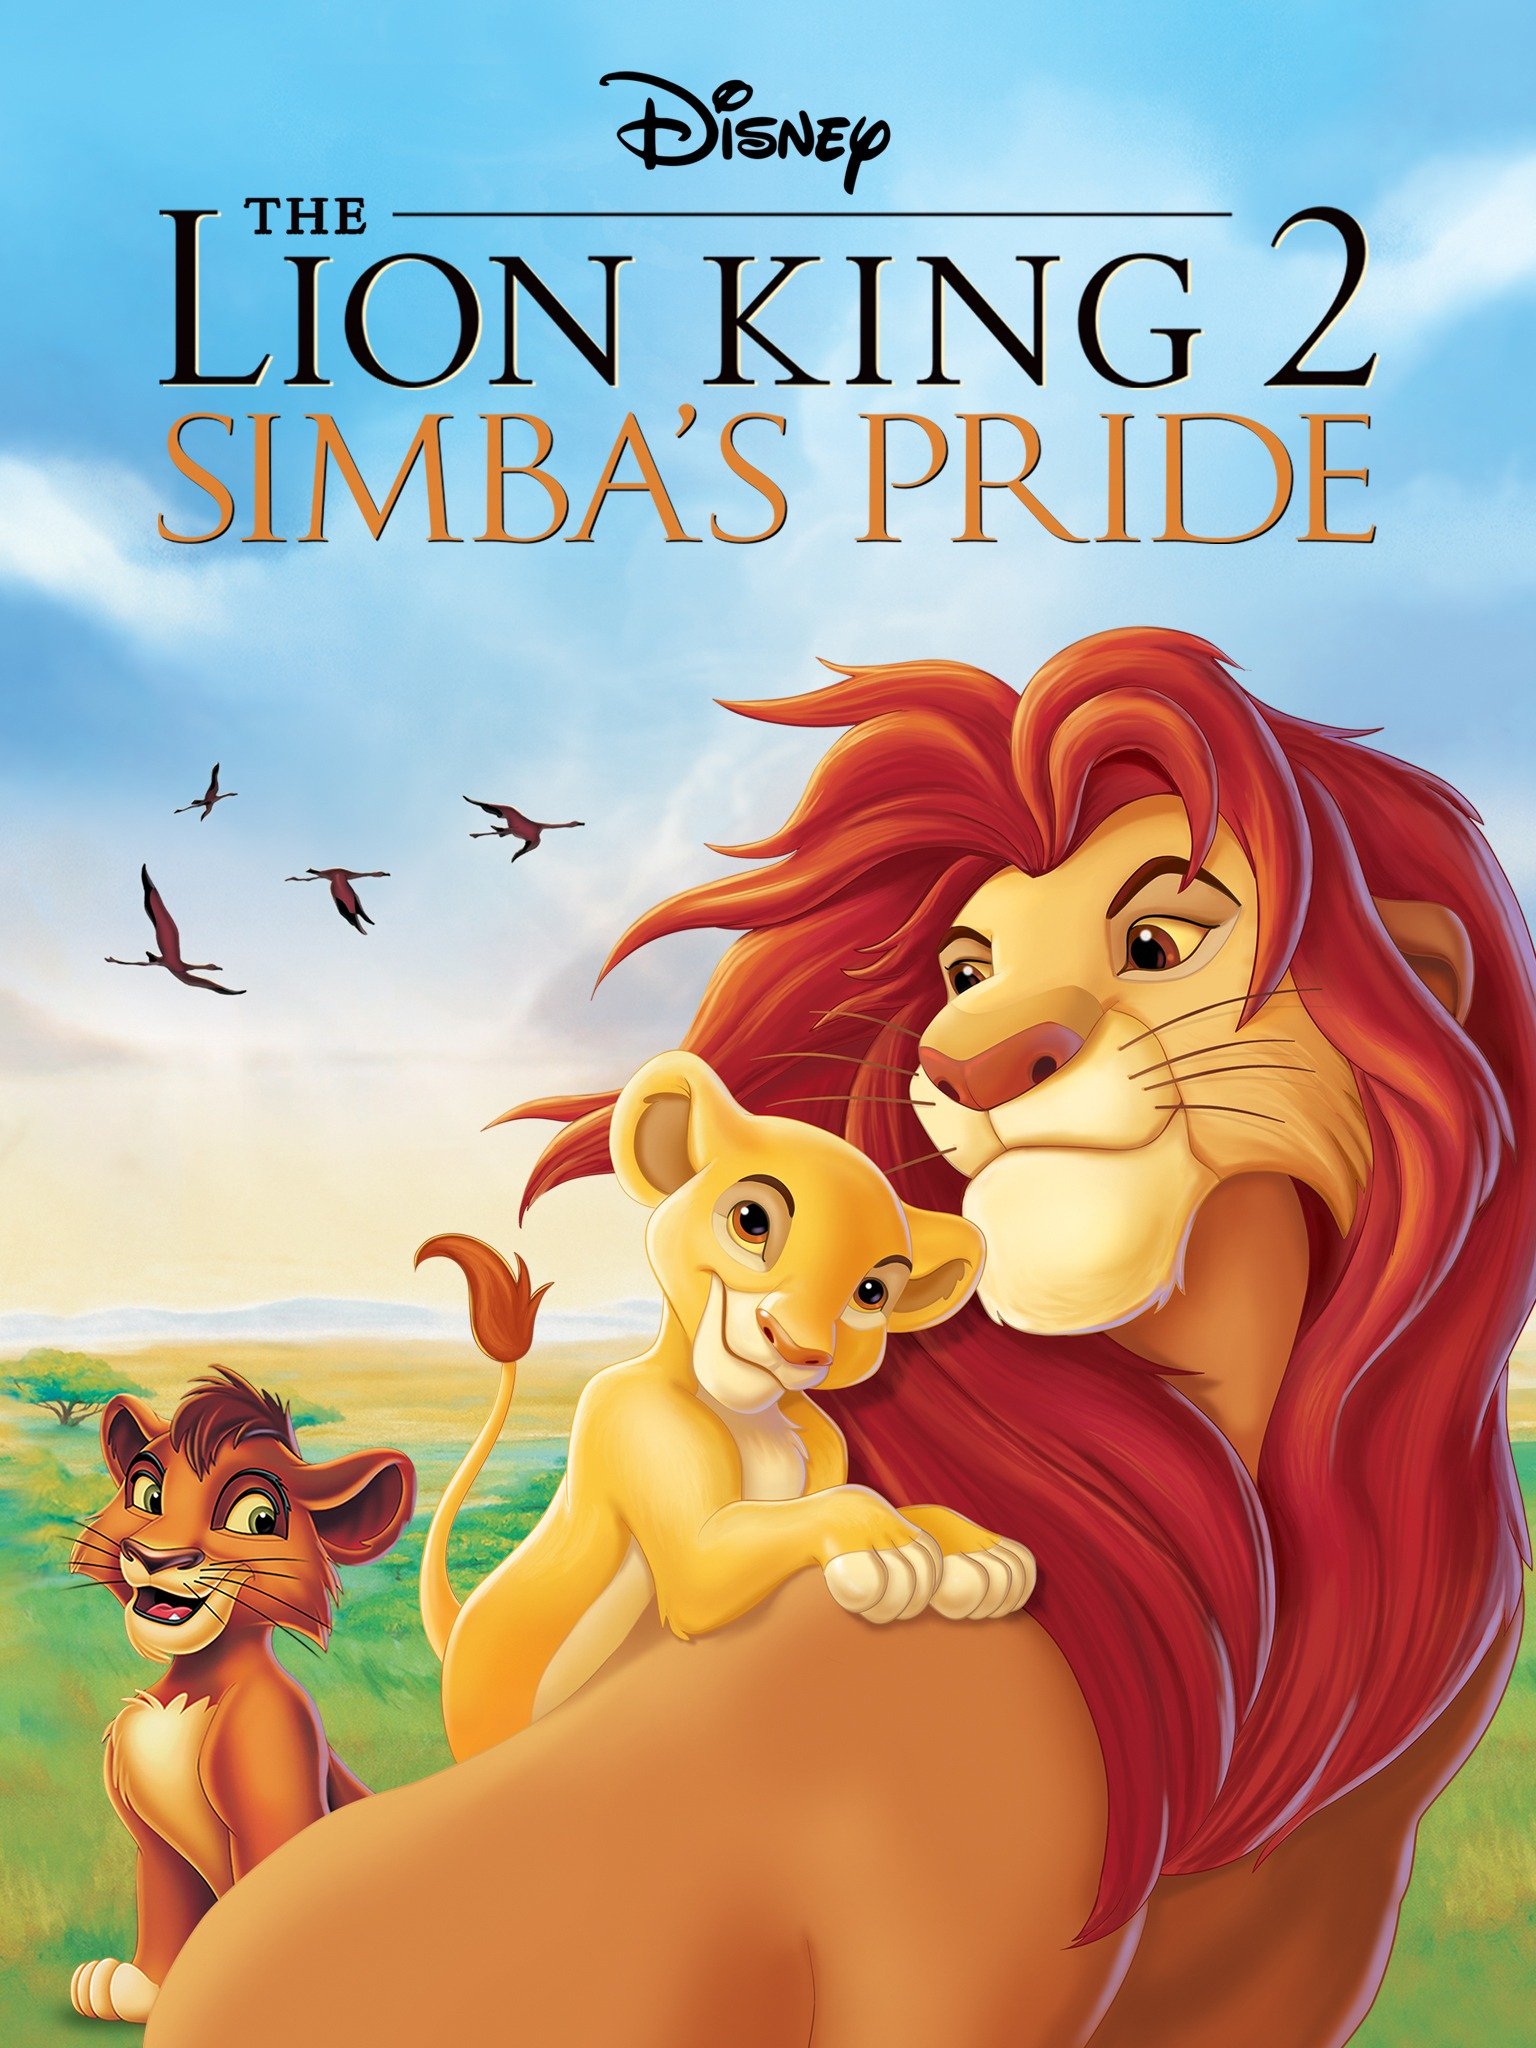 The Lion King II: Simba's Pride (1998)
Best Disney Movies From The 90's